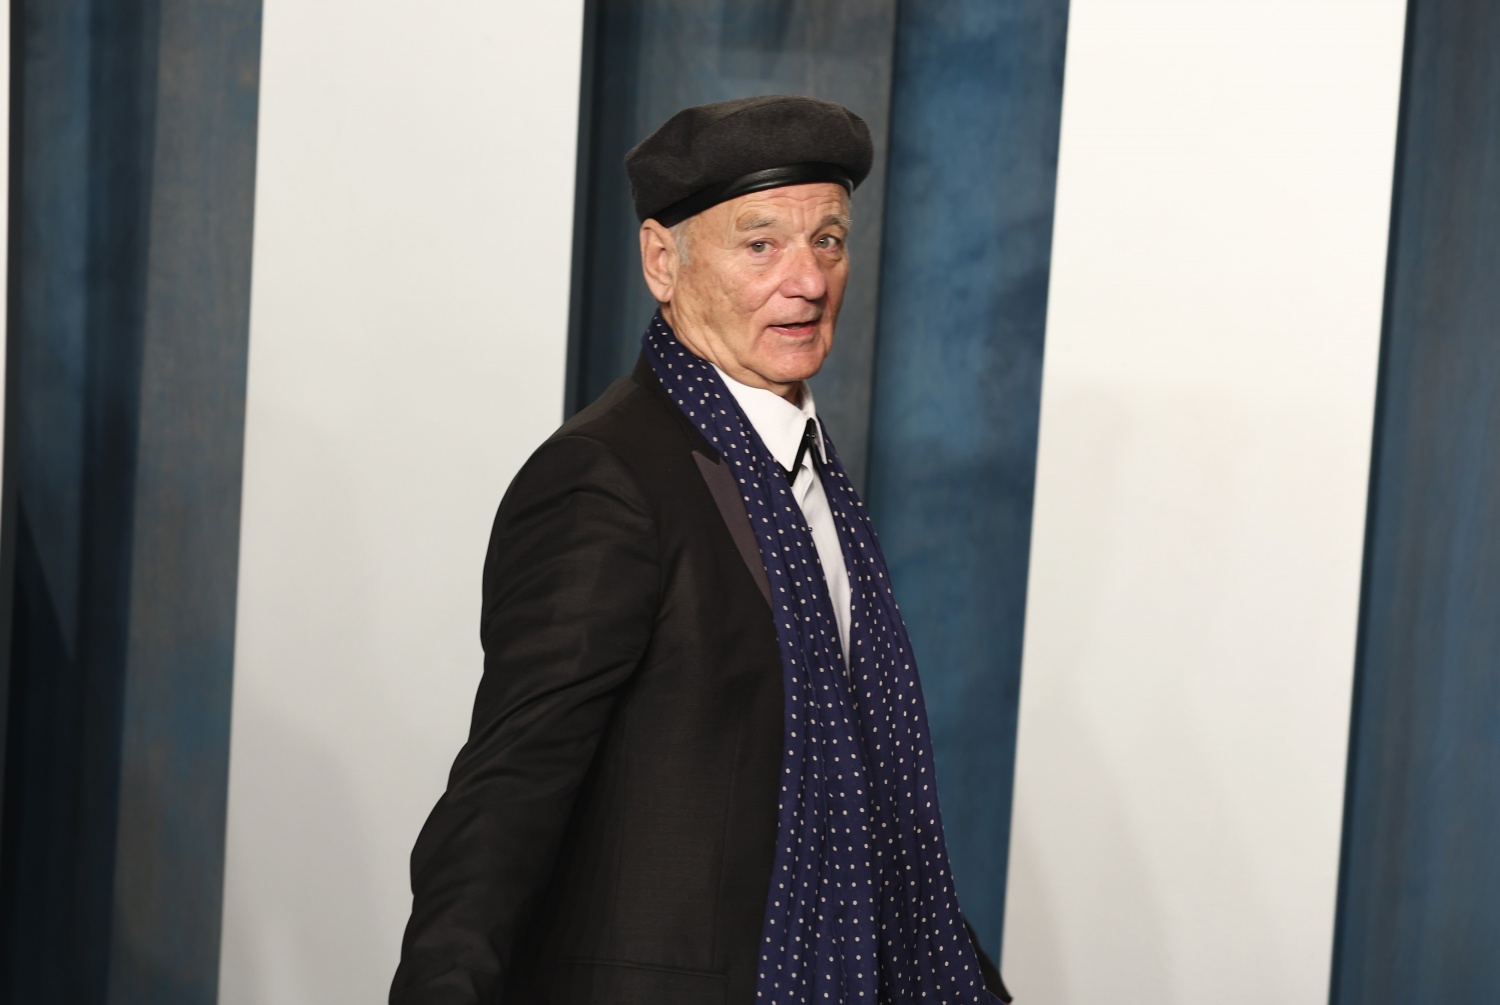 Bill Murray attends the 2022 Vanity Fair Oscar Party hosted by Radhika Jones at Wallis Annenberg Center for the Performing Arts on March 27, 2022 in Beverly Hills, California. (Photo by Arturo Holmes/FilmMagic)